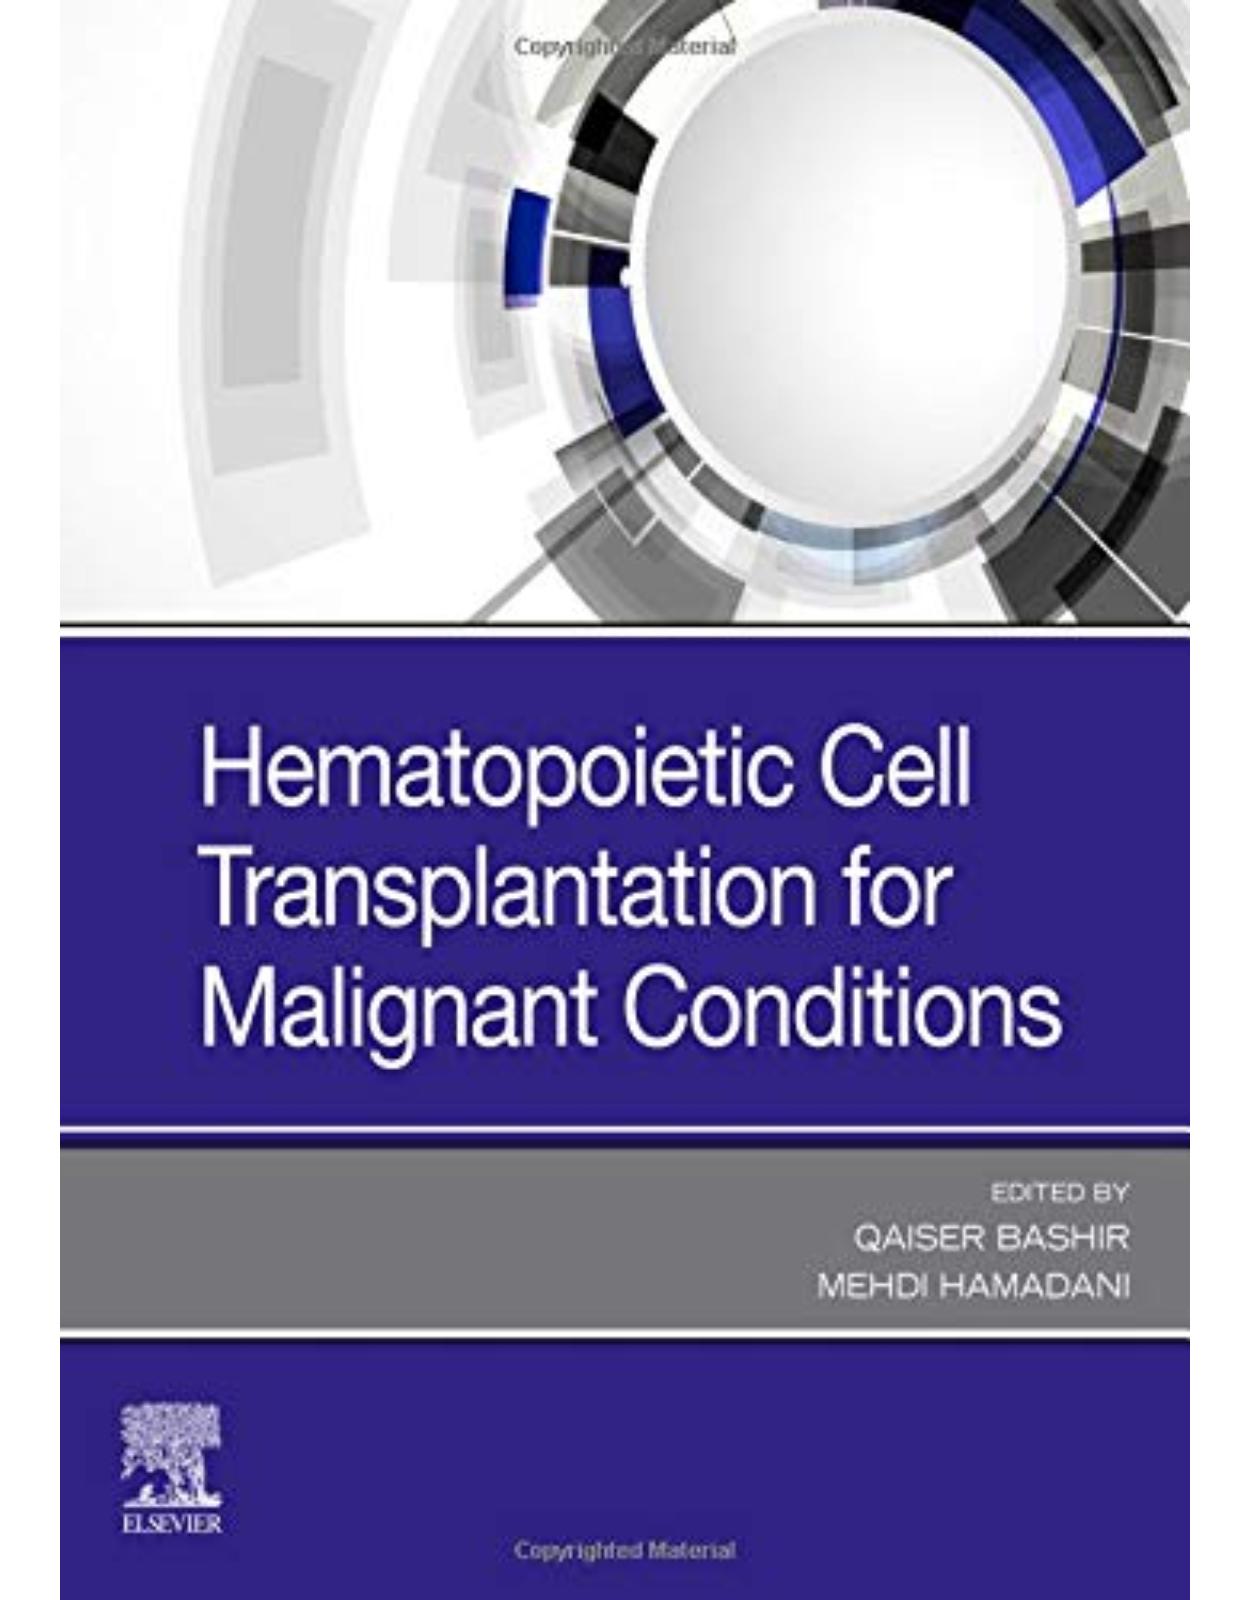 Hematopoietic Cell Transplantation for Malignant Conditions 